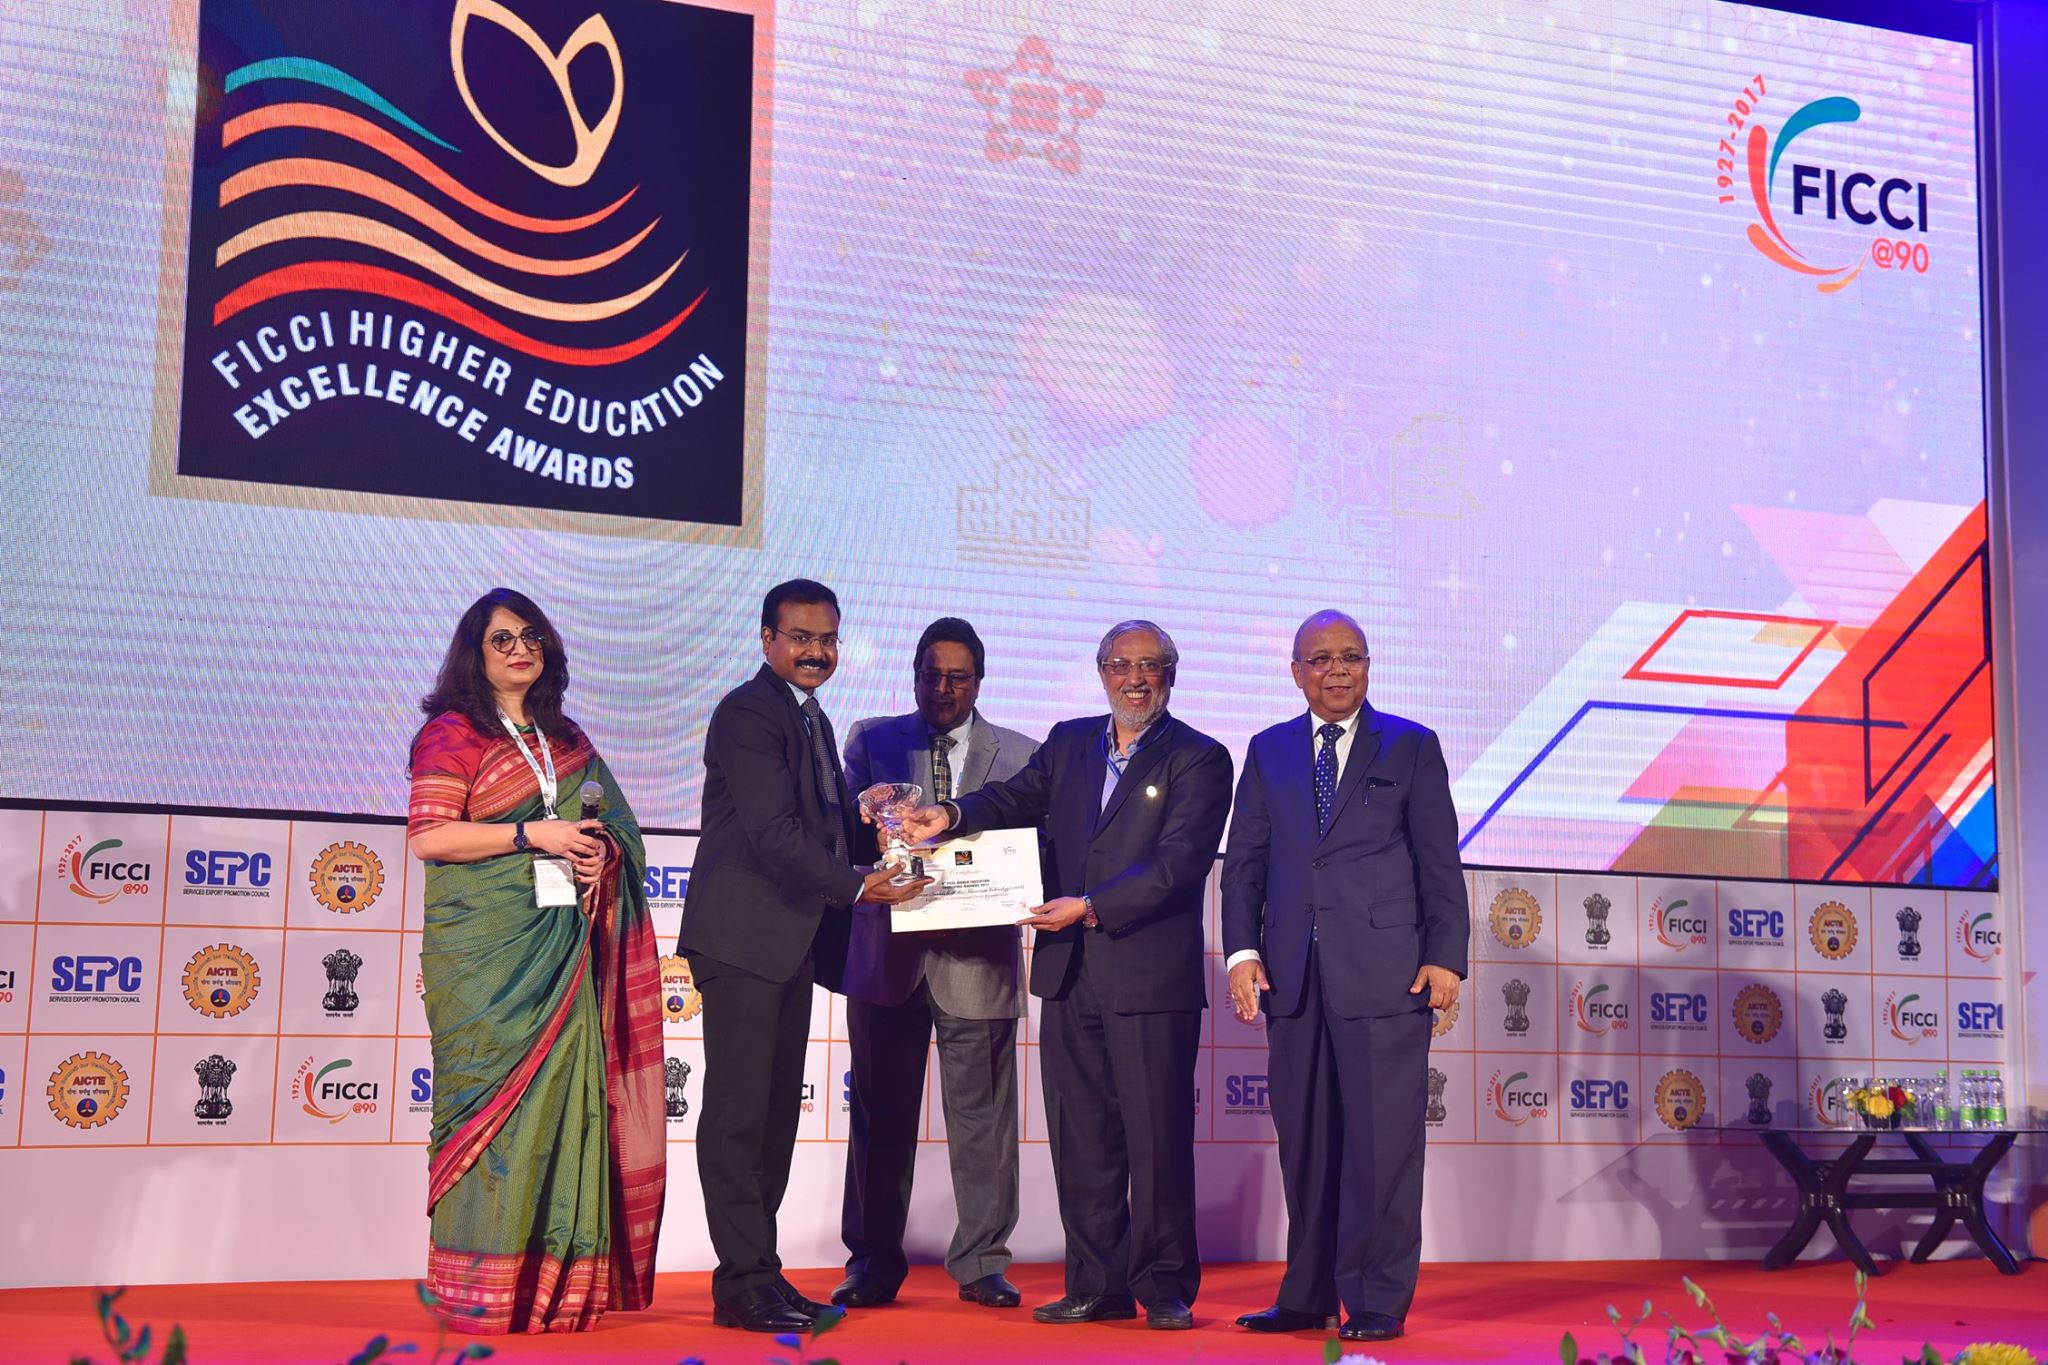 FICCI - Excellence in Institutional Social Responsibility